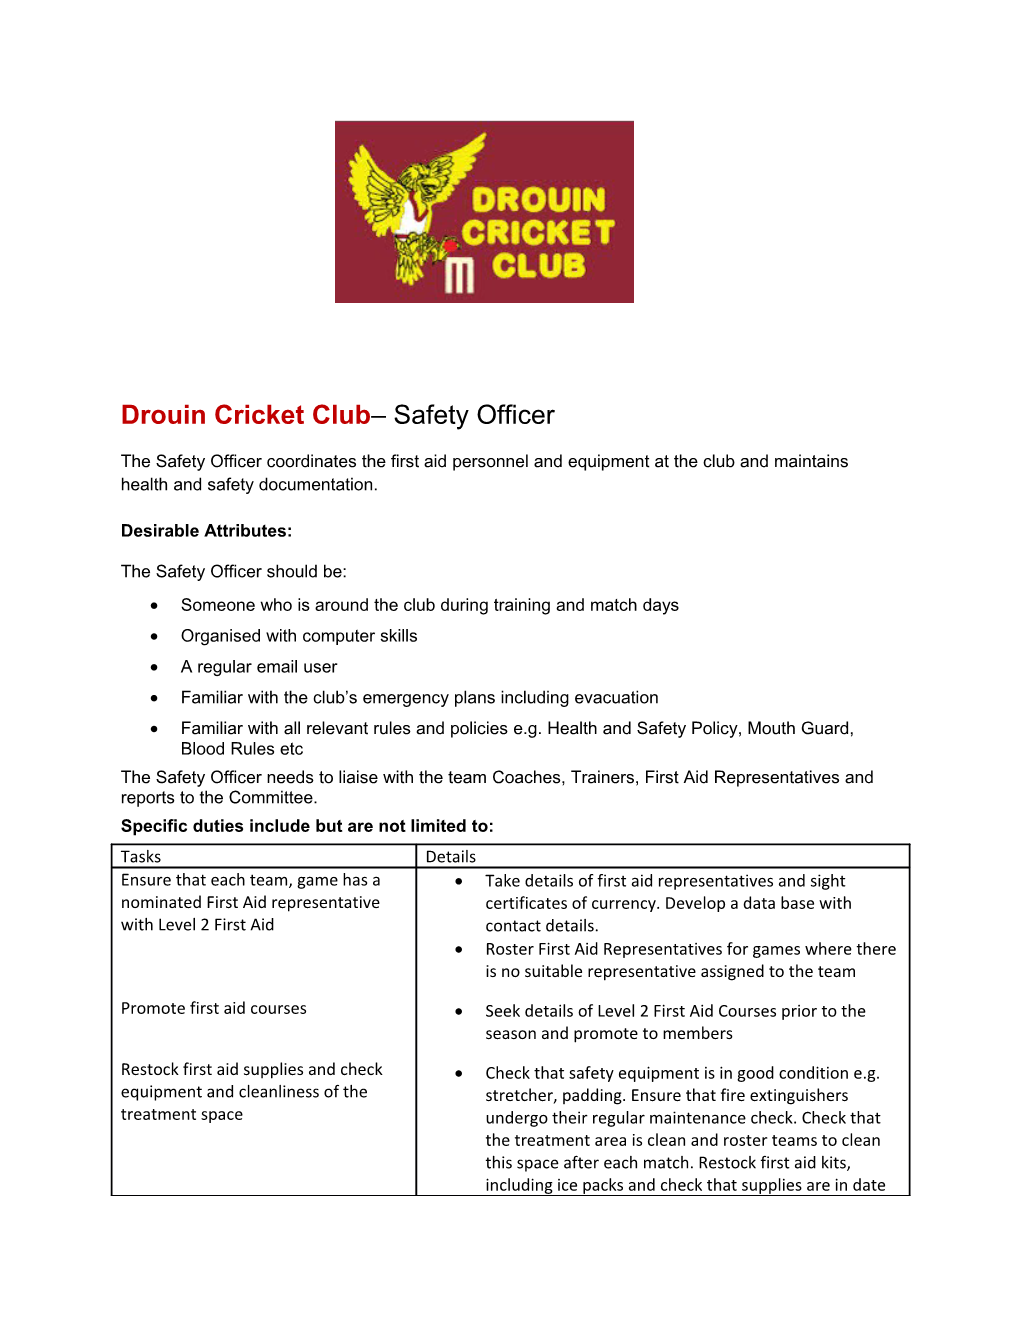 Drouin Cricket Club Safety Officer